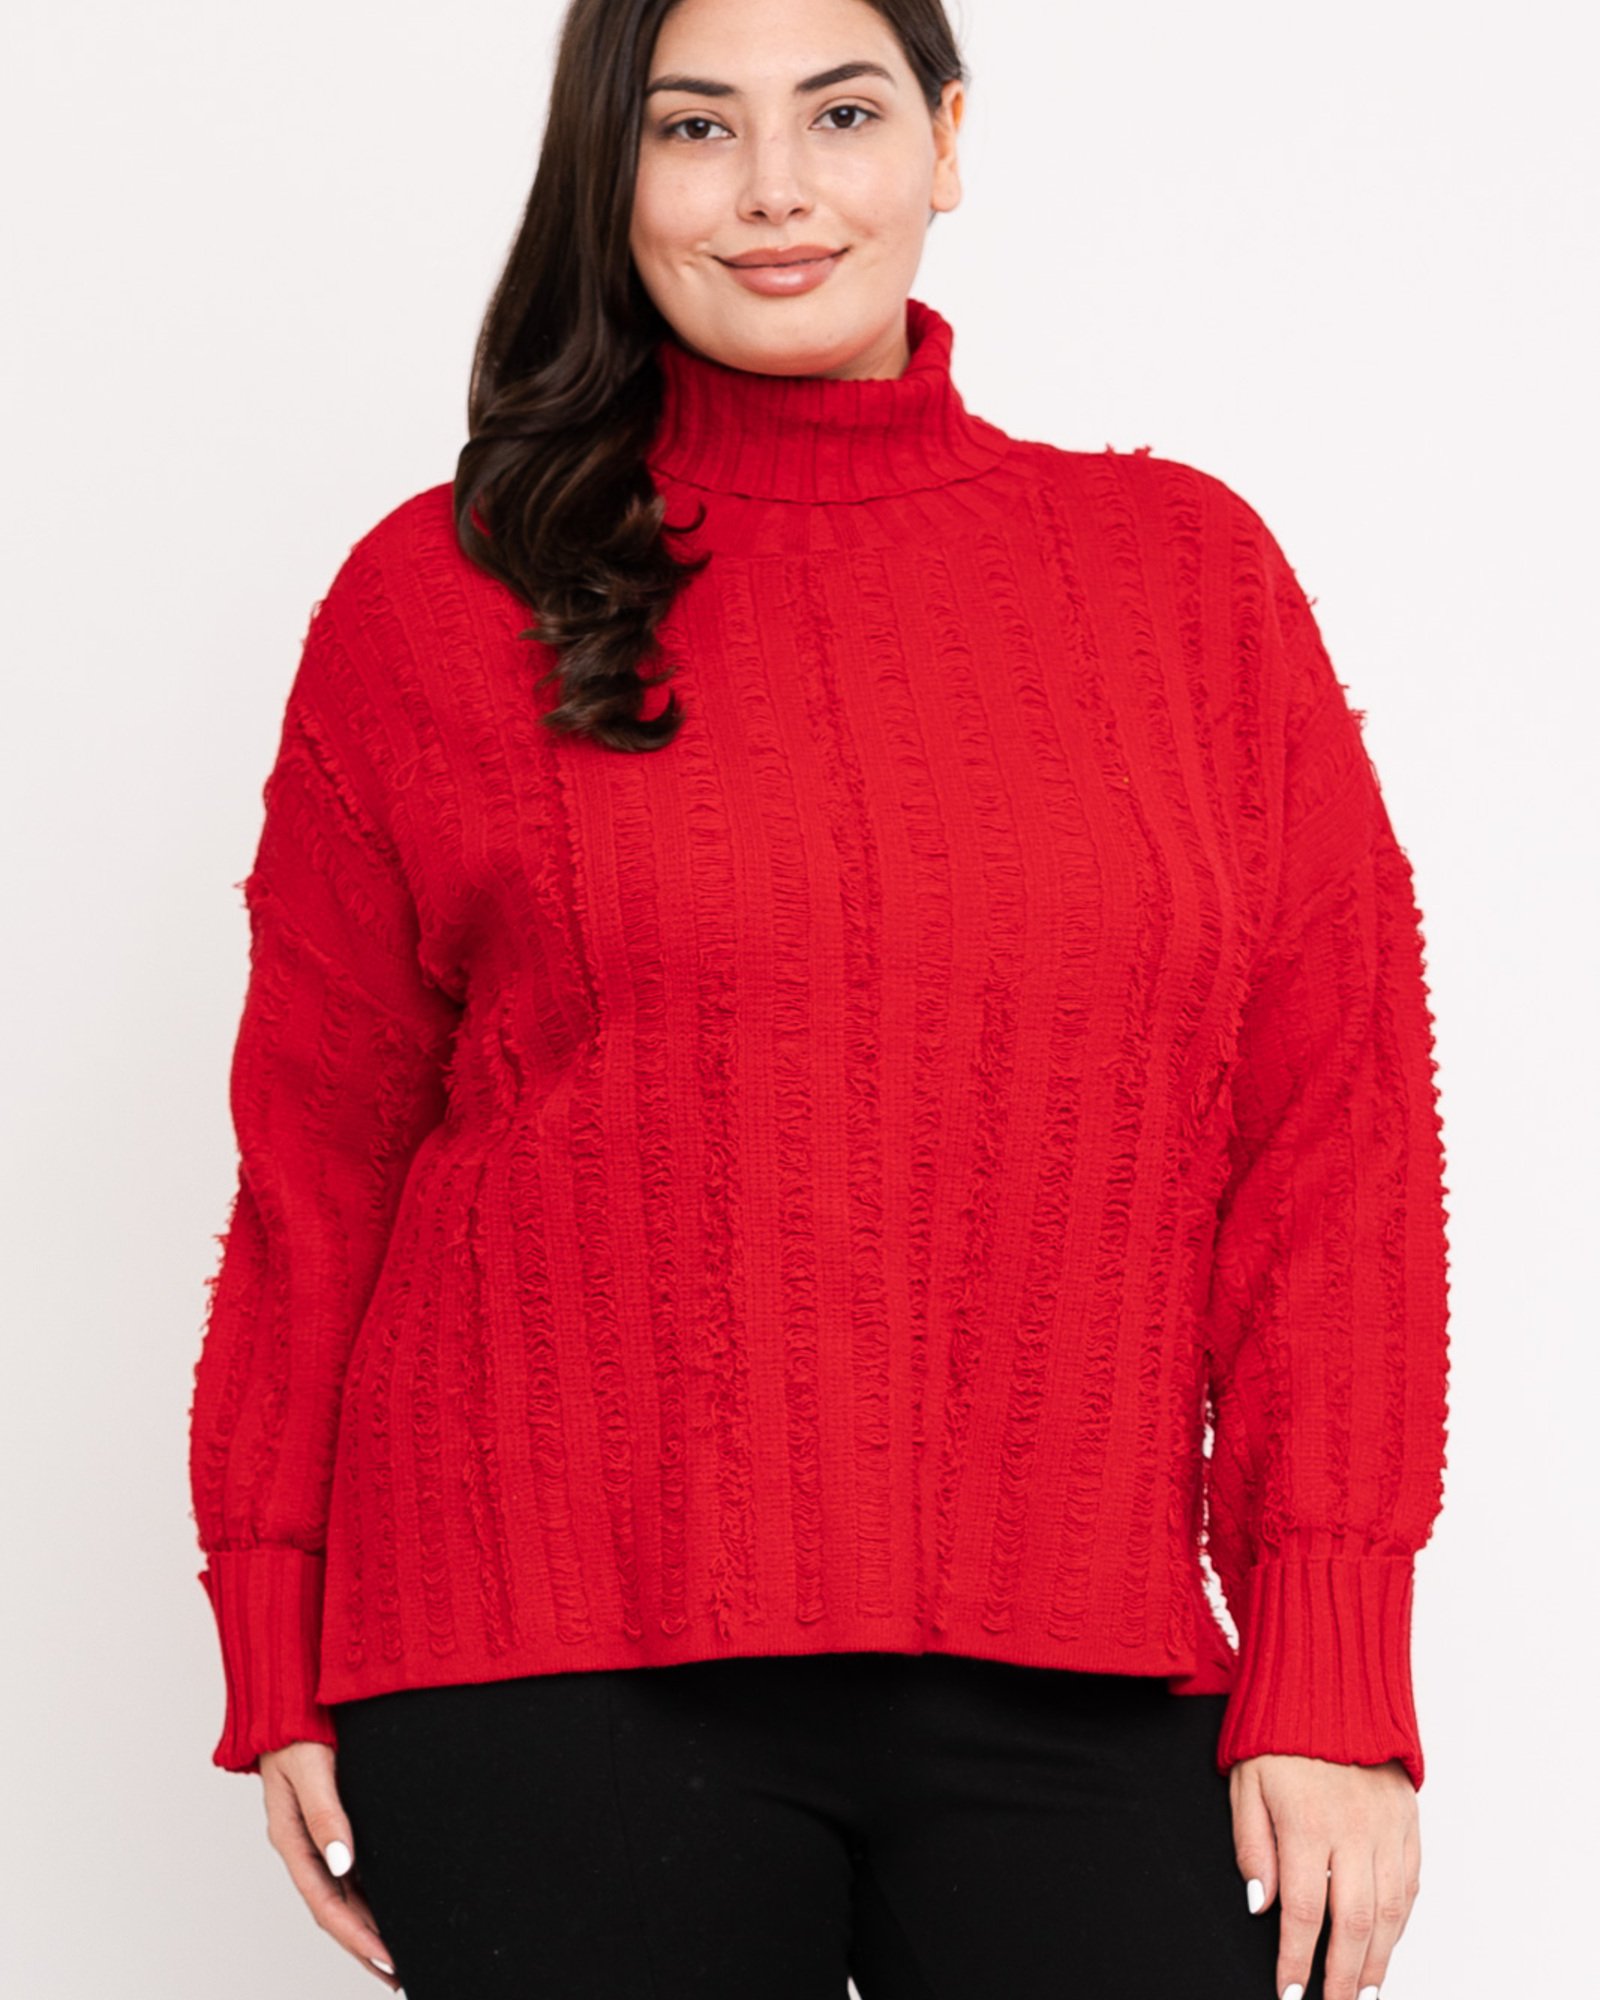 The 25 Best Red Sweaters for Women in 2022 | Who What Wear